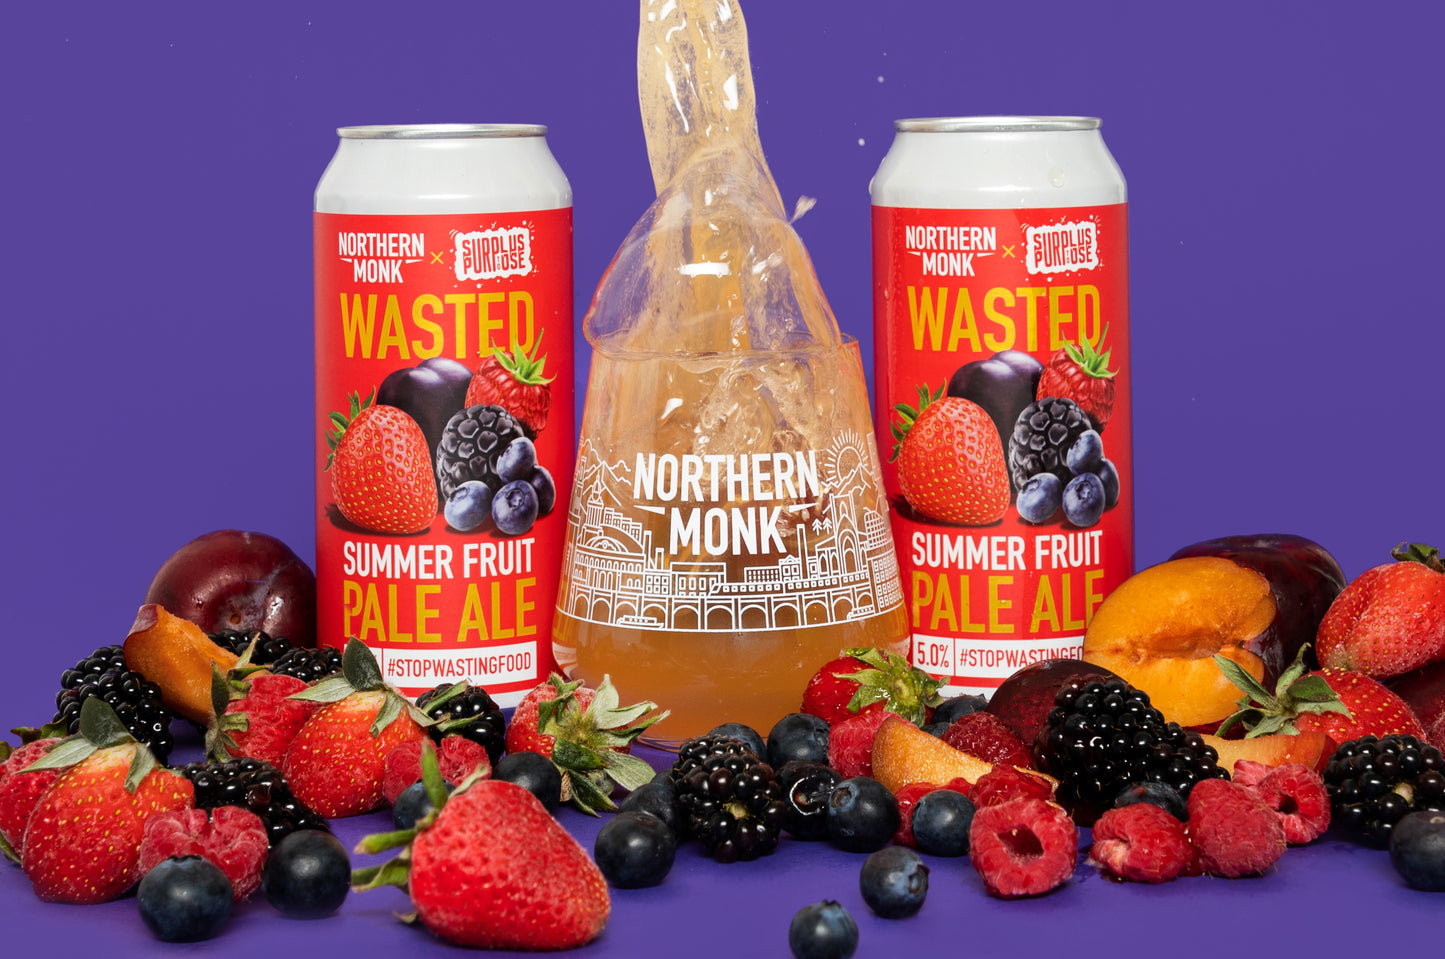 WASTED // SUMMER FRUITS // PALE ALE